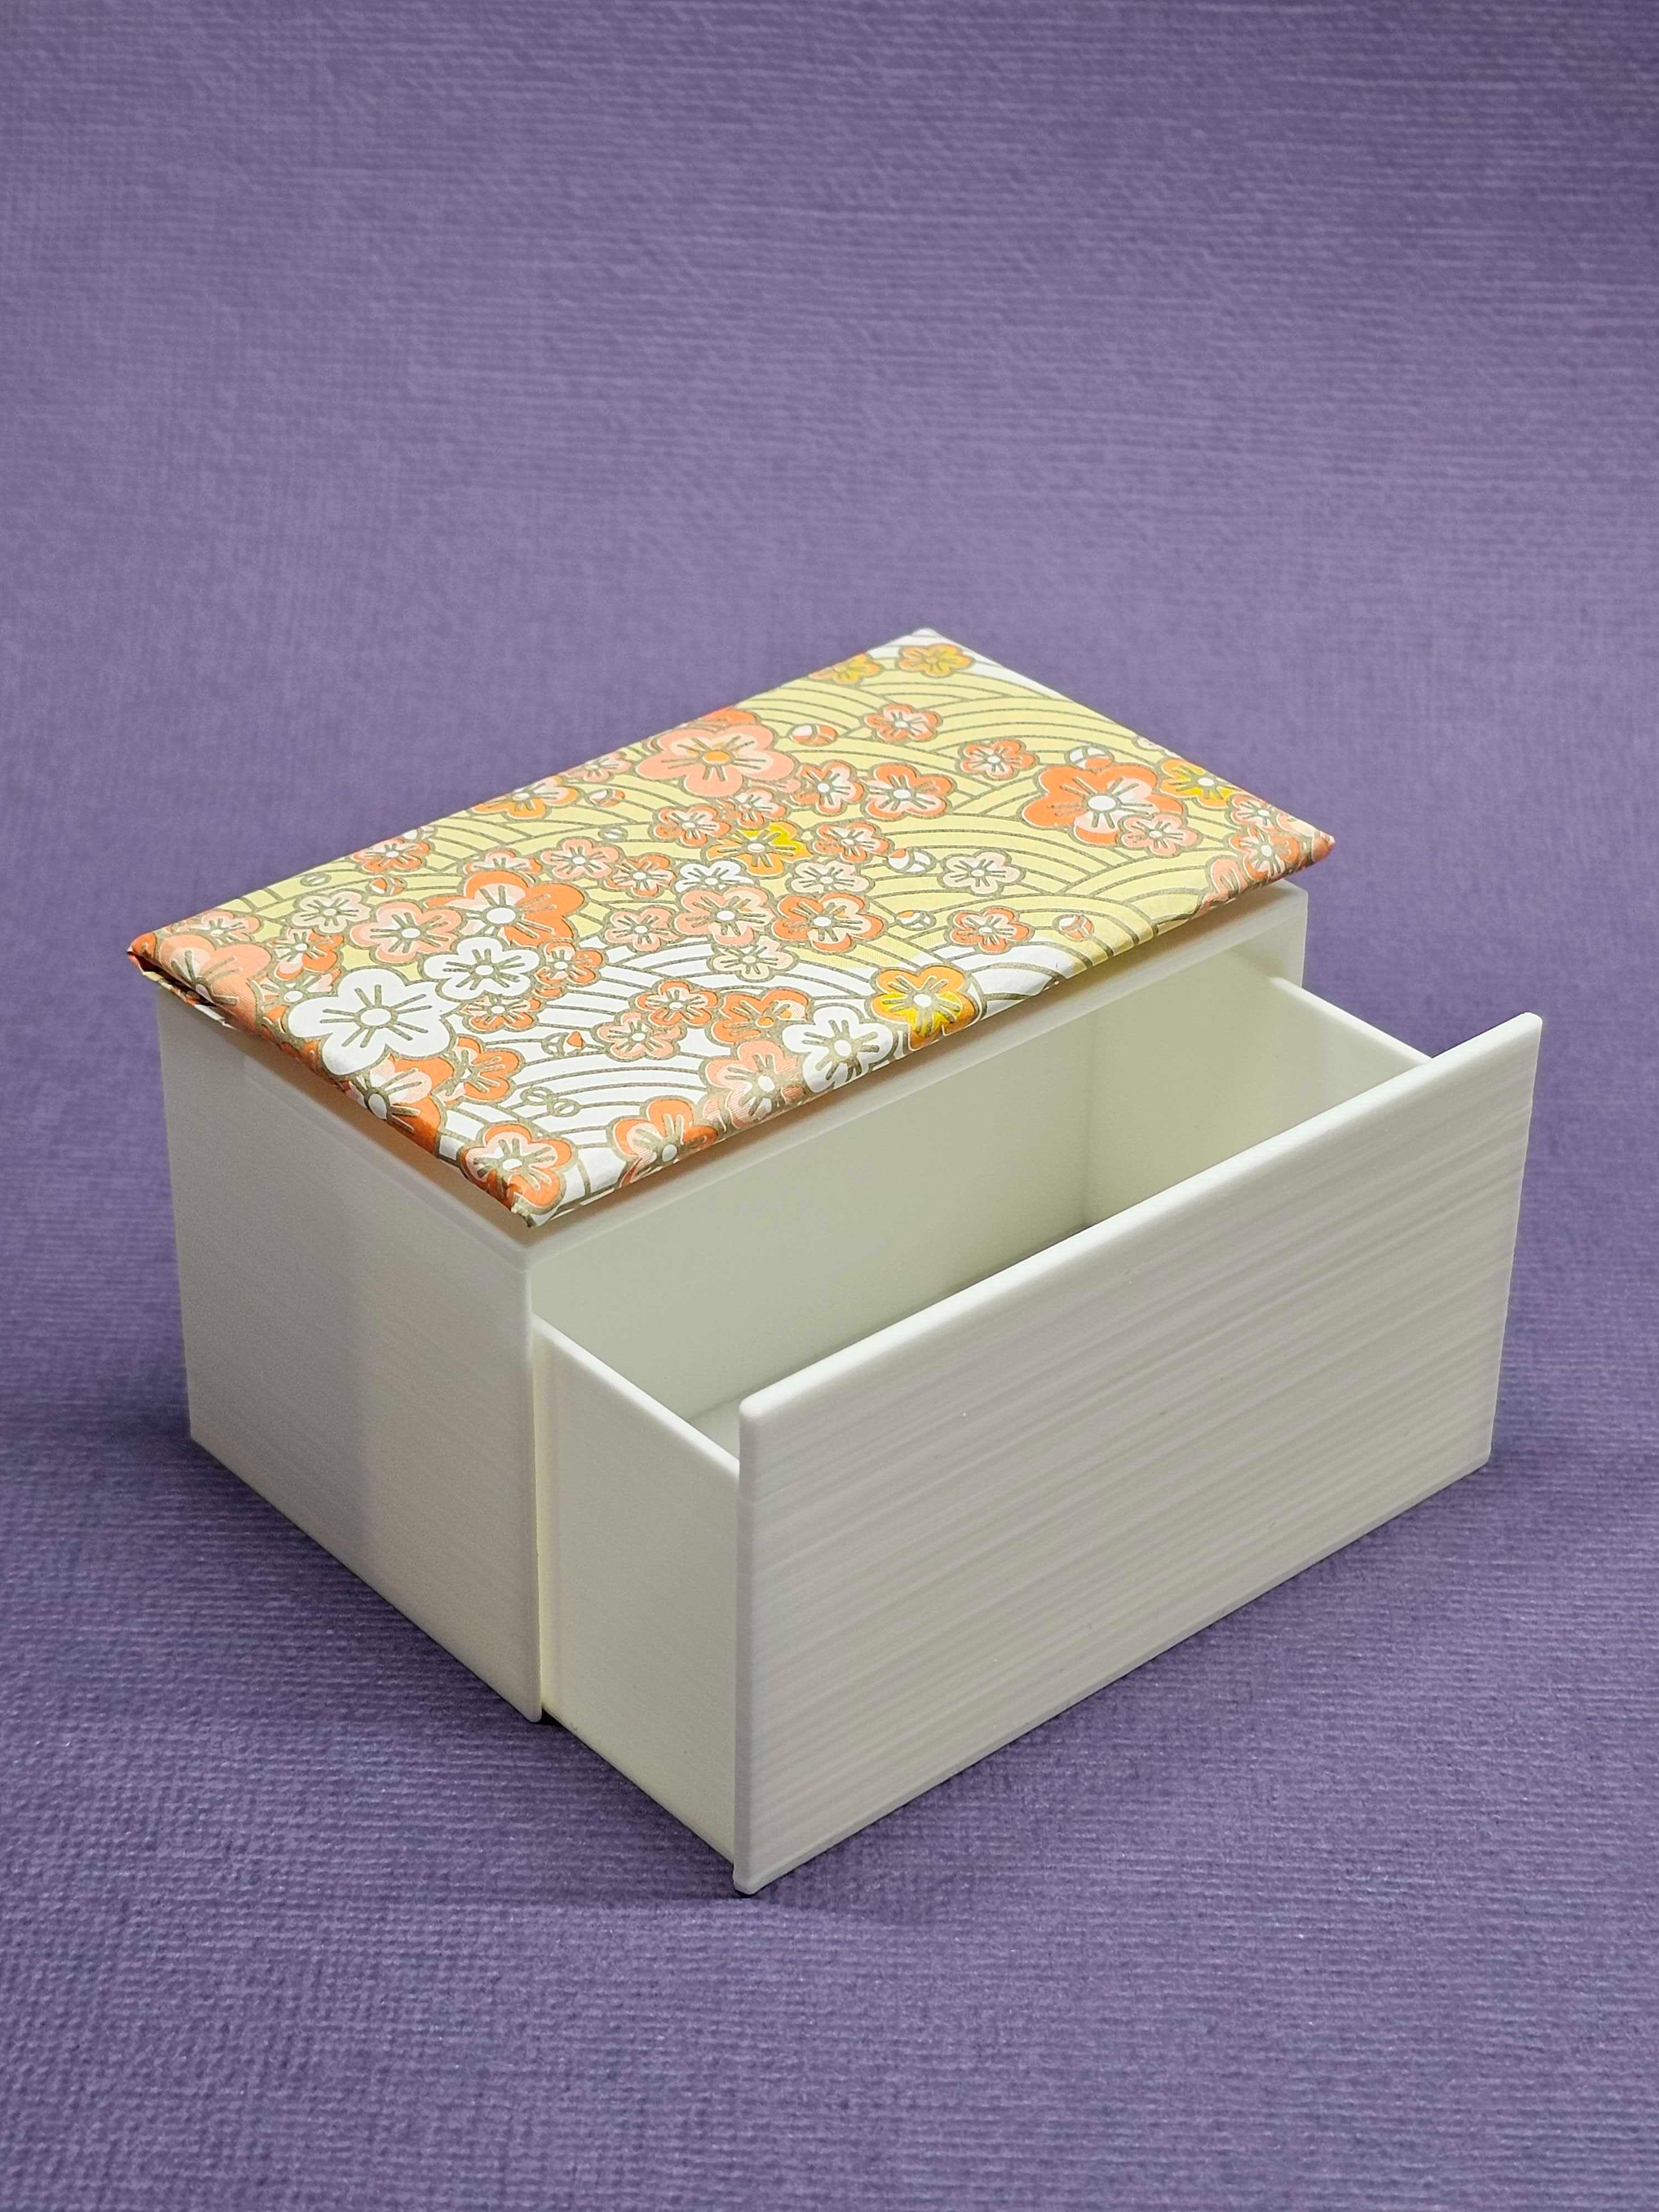 Clip-on handles for miniature storage box | 1:12 scale dollhouse furniture 3d model